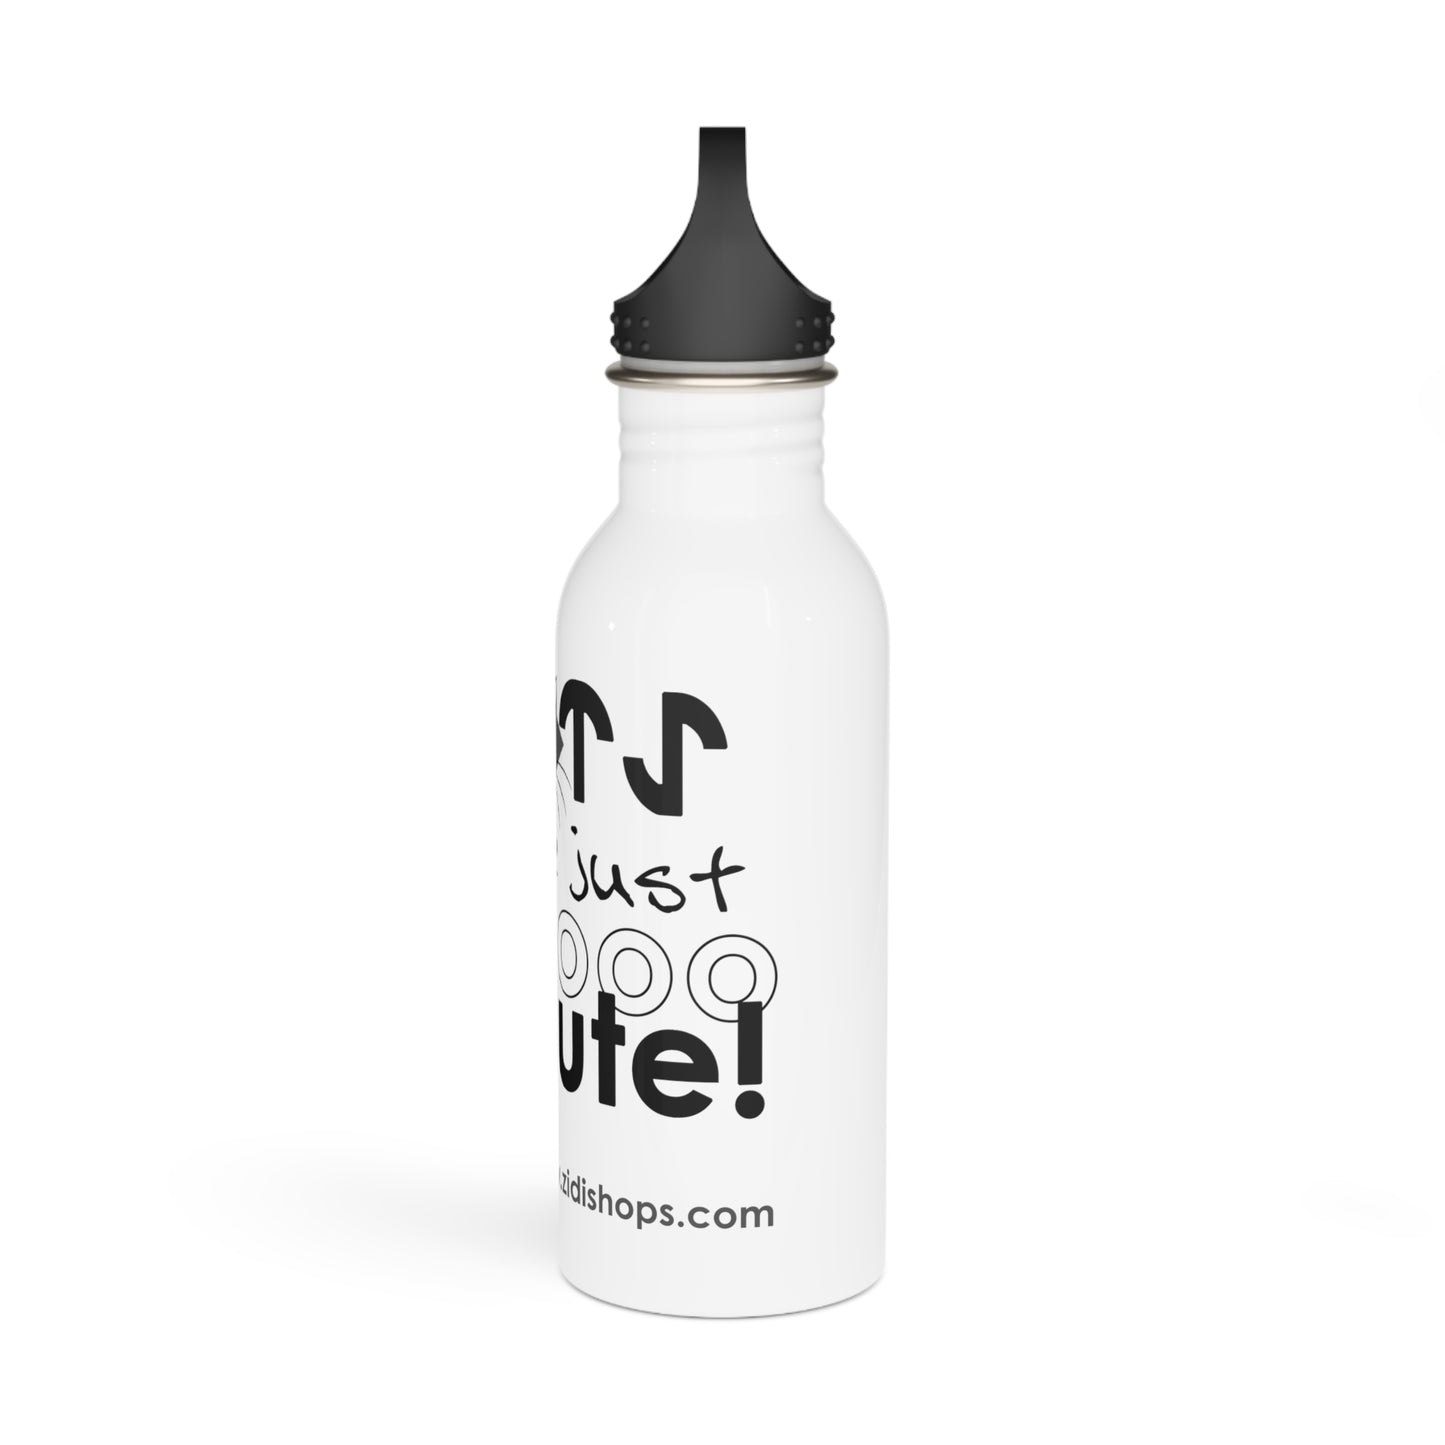 Stainless Steel Water Bottle, Cats are just so cute,  Made with 18/8 food-grade stainless steel, wide neck for effortless sipping.